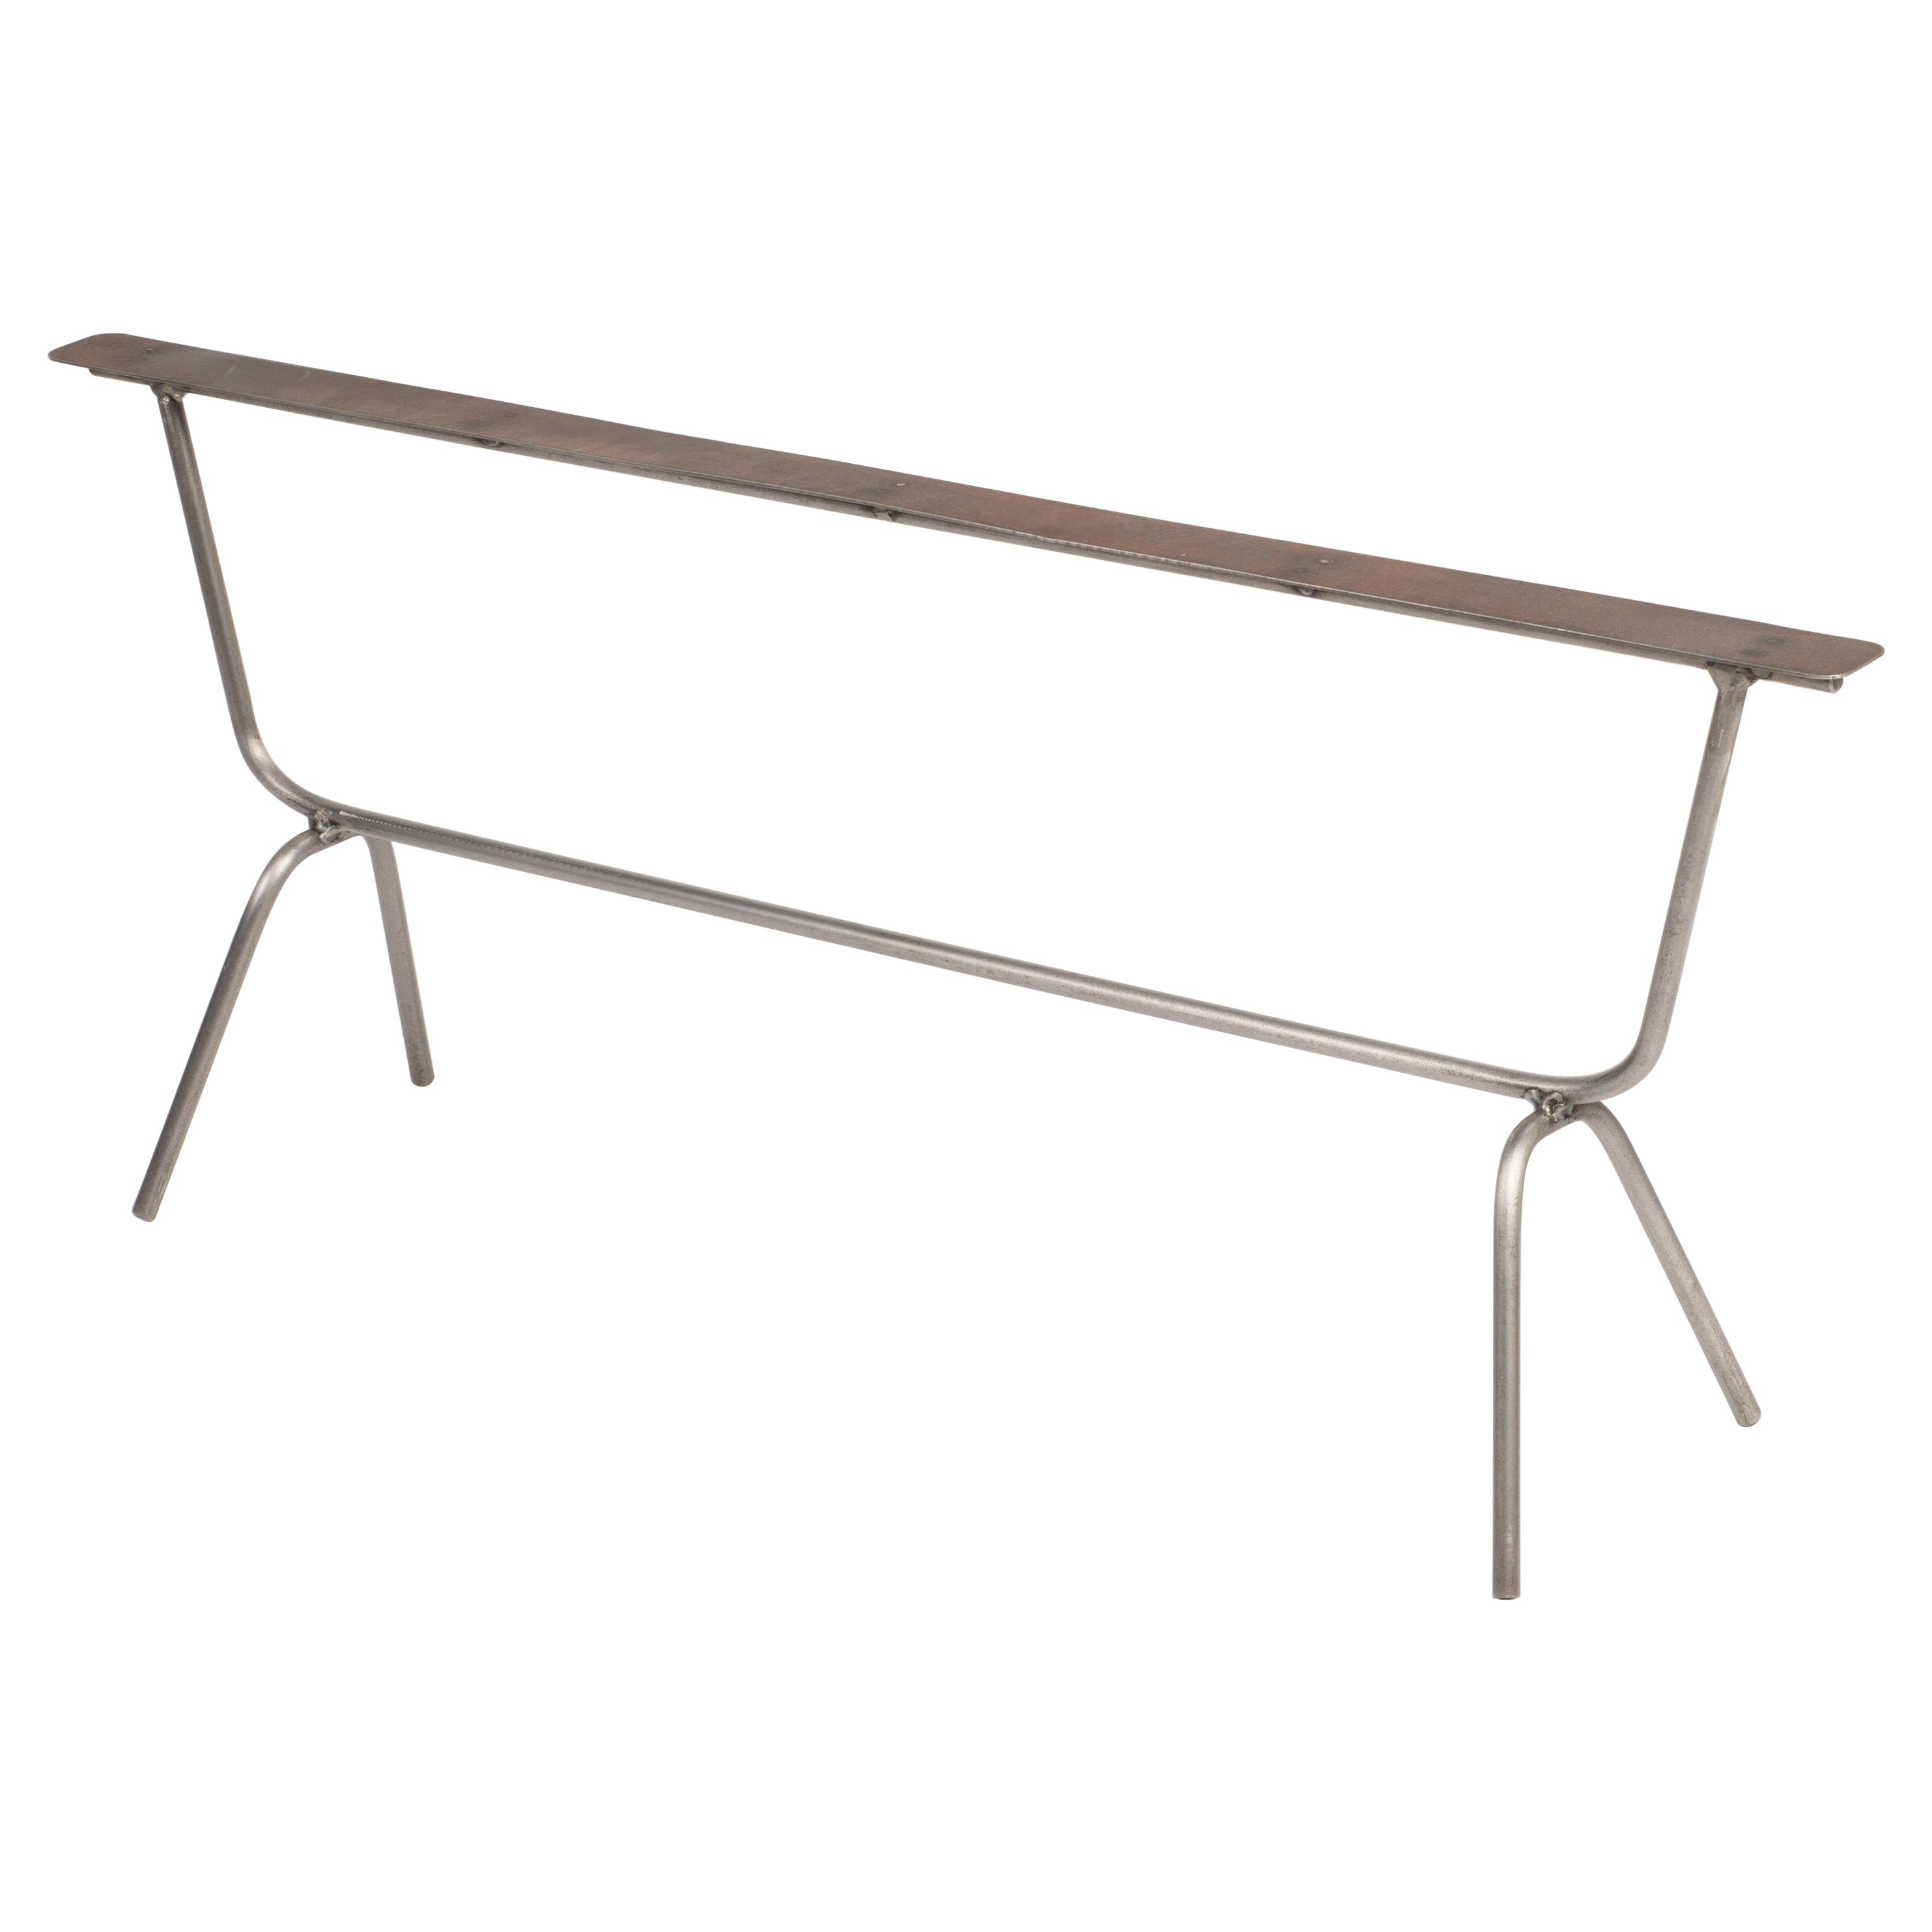 Minimalist Bench by Neil Nenner For Sale